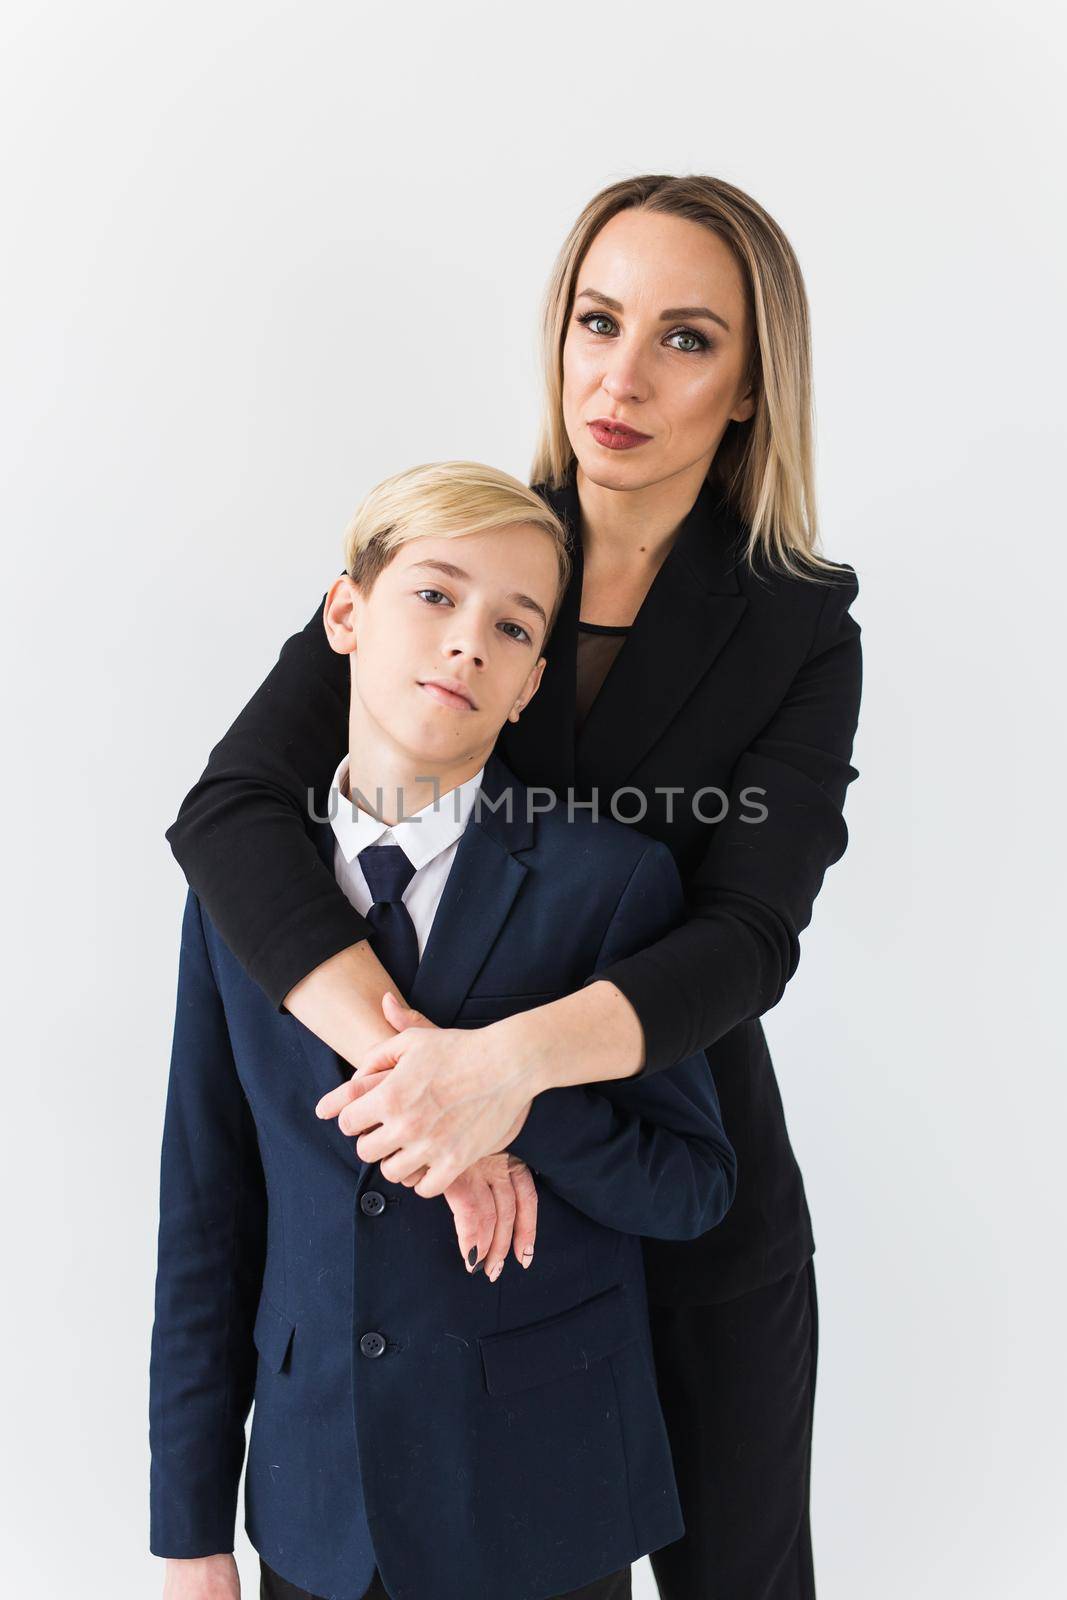 Teenager and single parent - Young mother and son standing together on white background. by Satura86